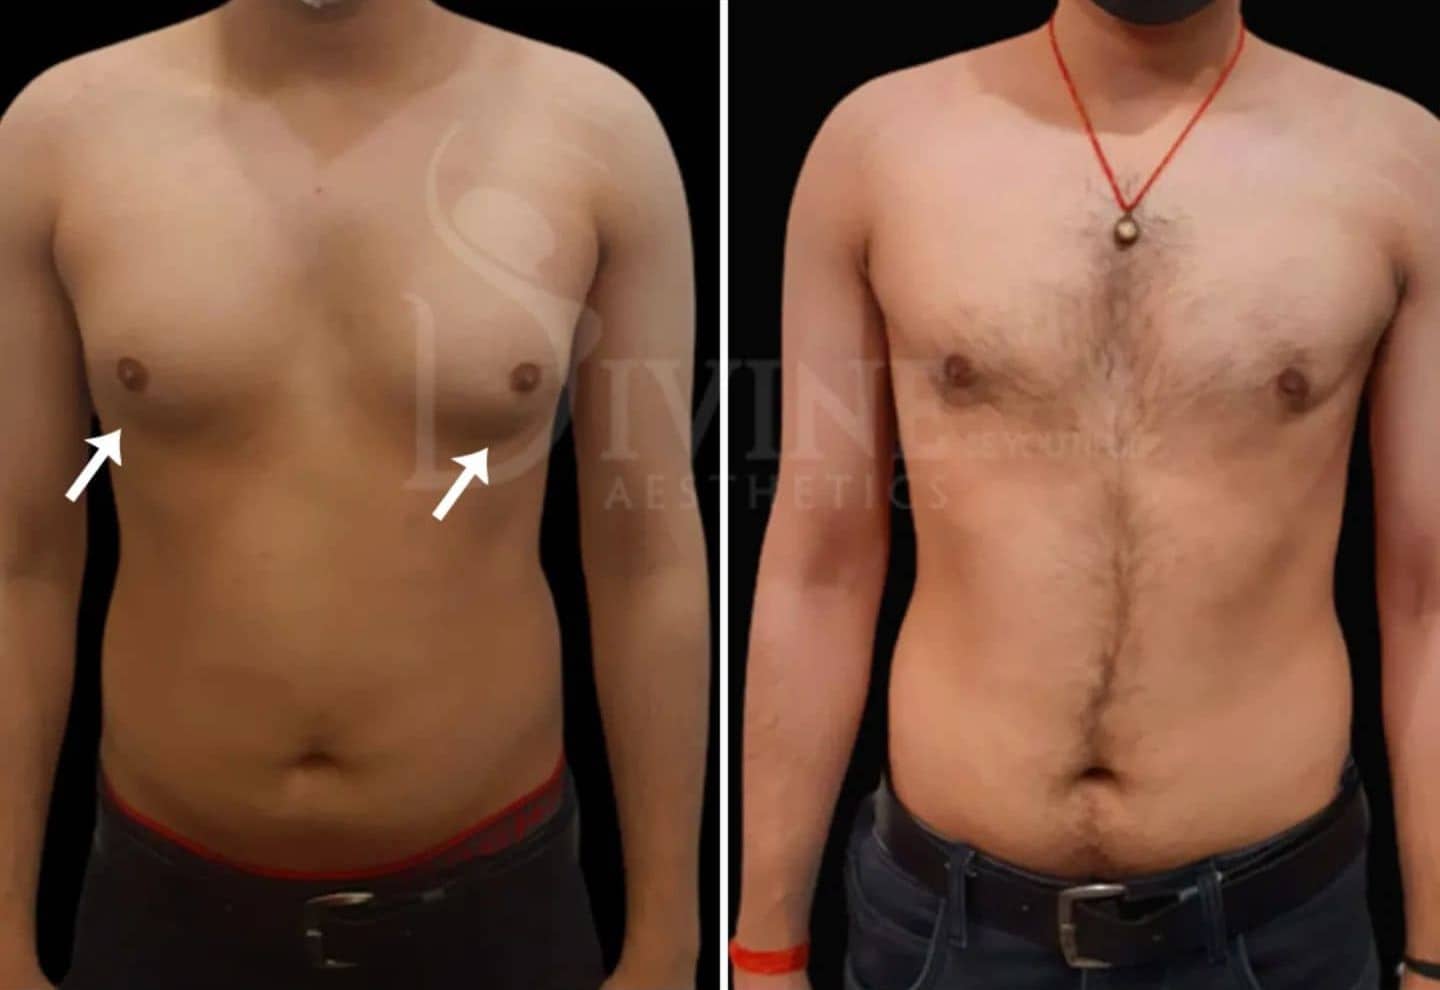 Gynecomastia Surgery Before and After Images